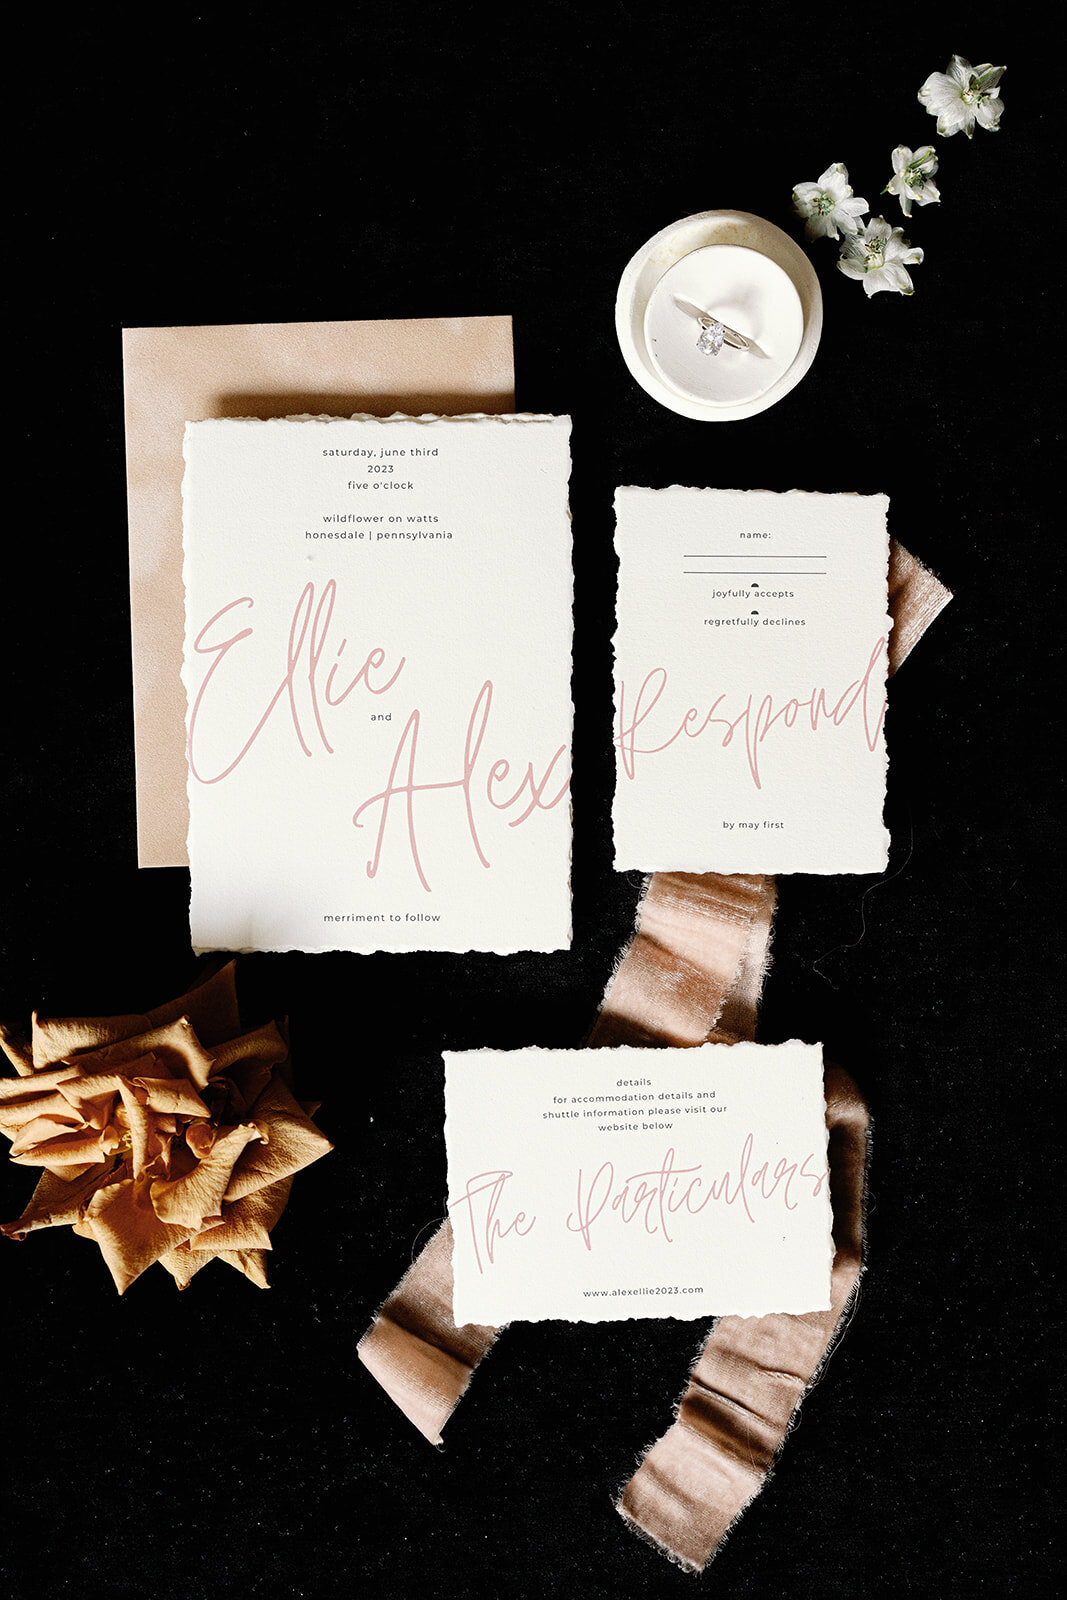 Detail photo of wedding stationery and rings on a black background